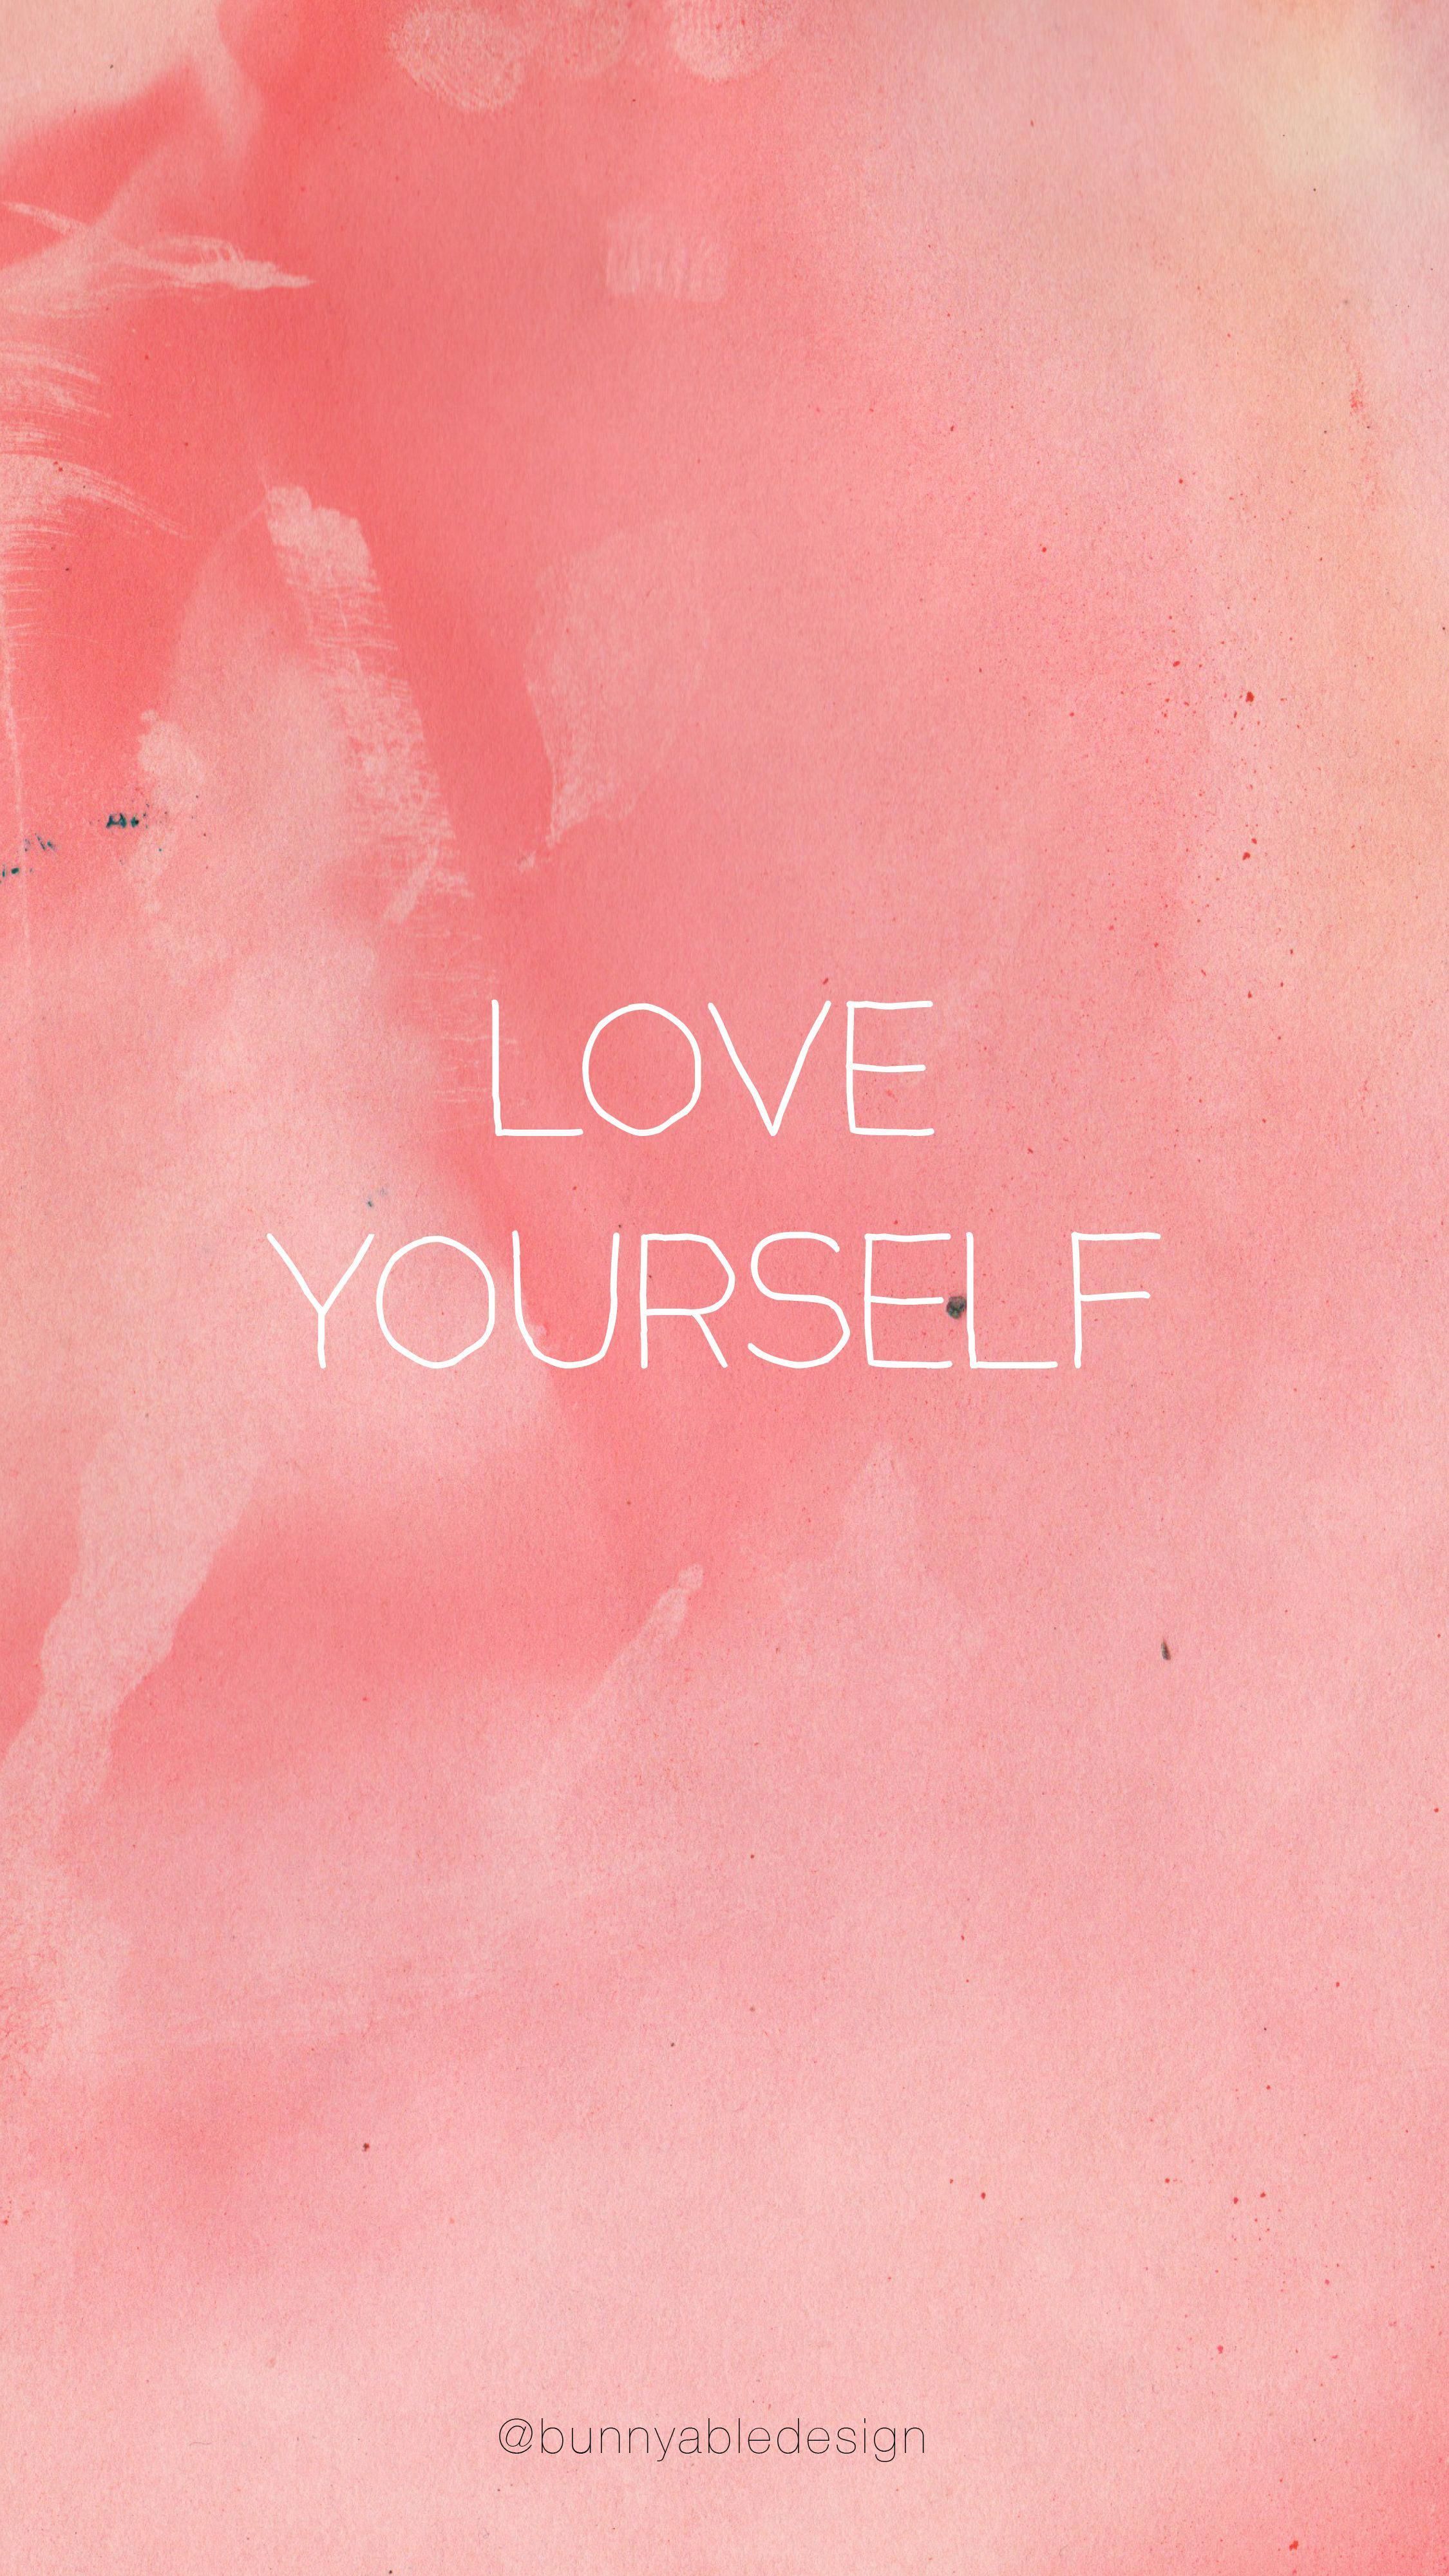 Love yourself ❤ #wallpaper #iphone #iphoneadvice. Wallpaper iphone love, iPhone wallpaper, Love wallpaper background